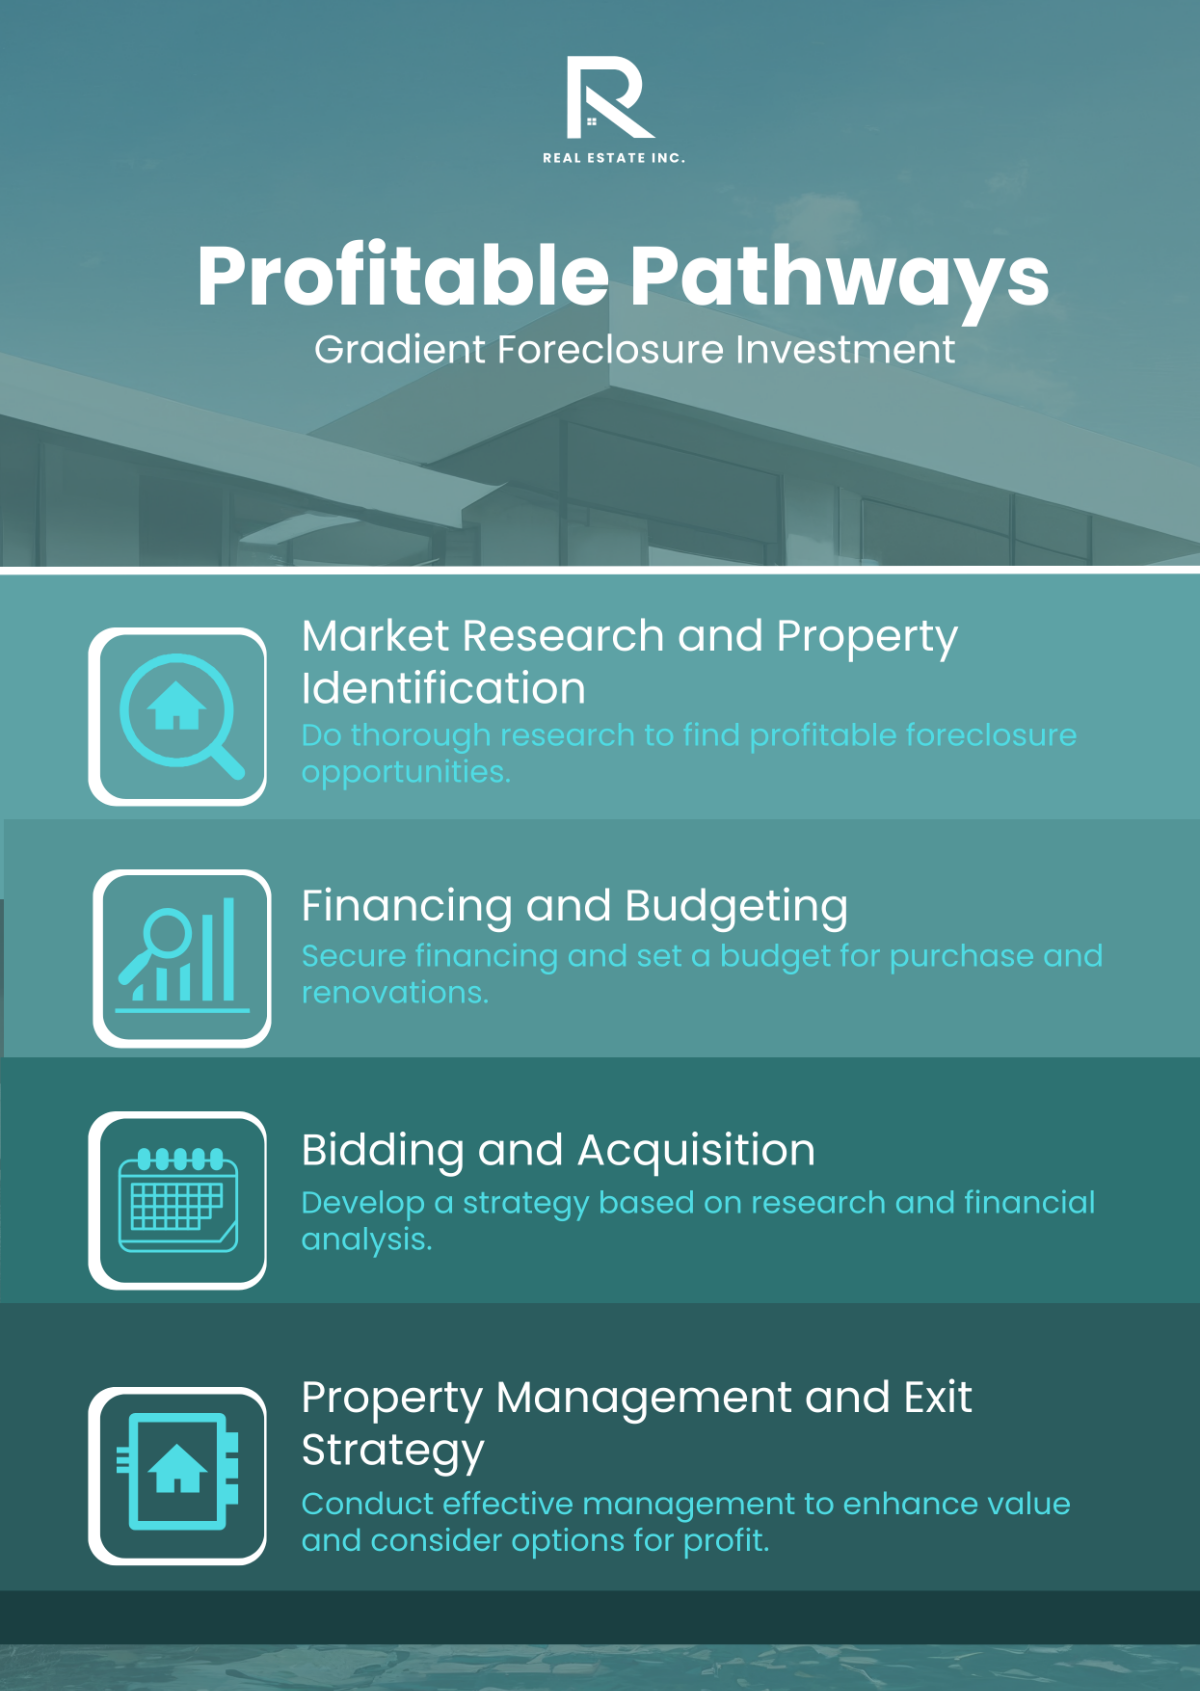 Free Real Estate Gradient Foreclosure Investment Infographic Template